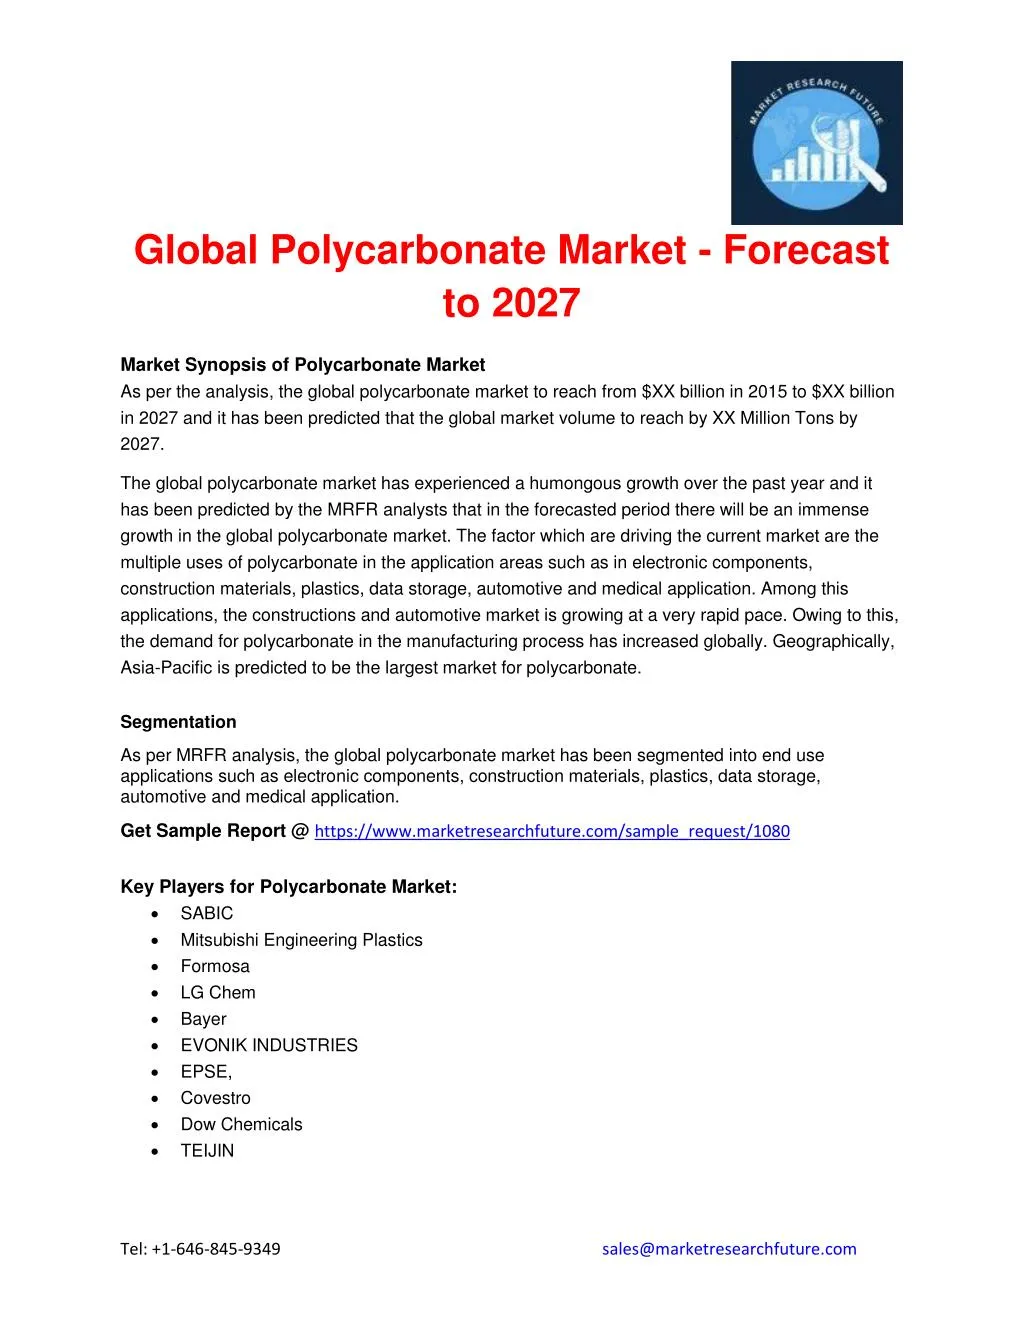 global polycarbonate market forecast to 2027